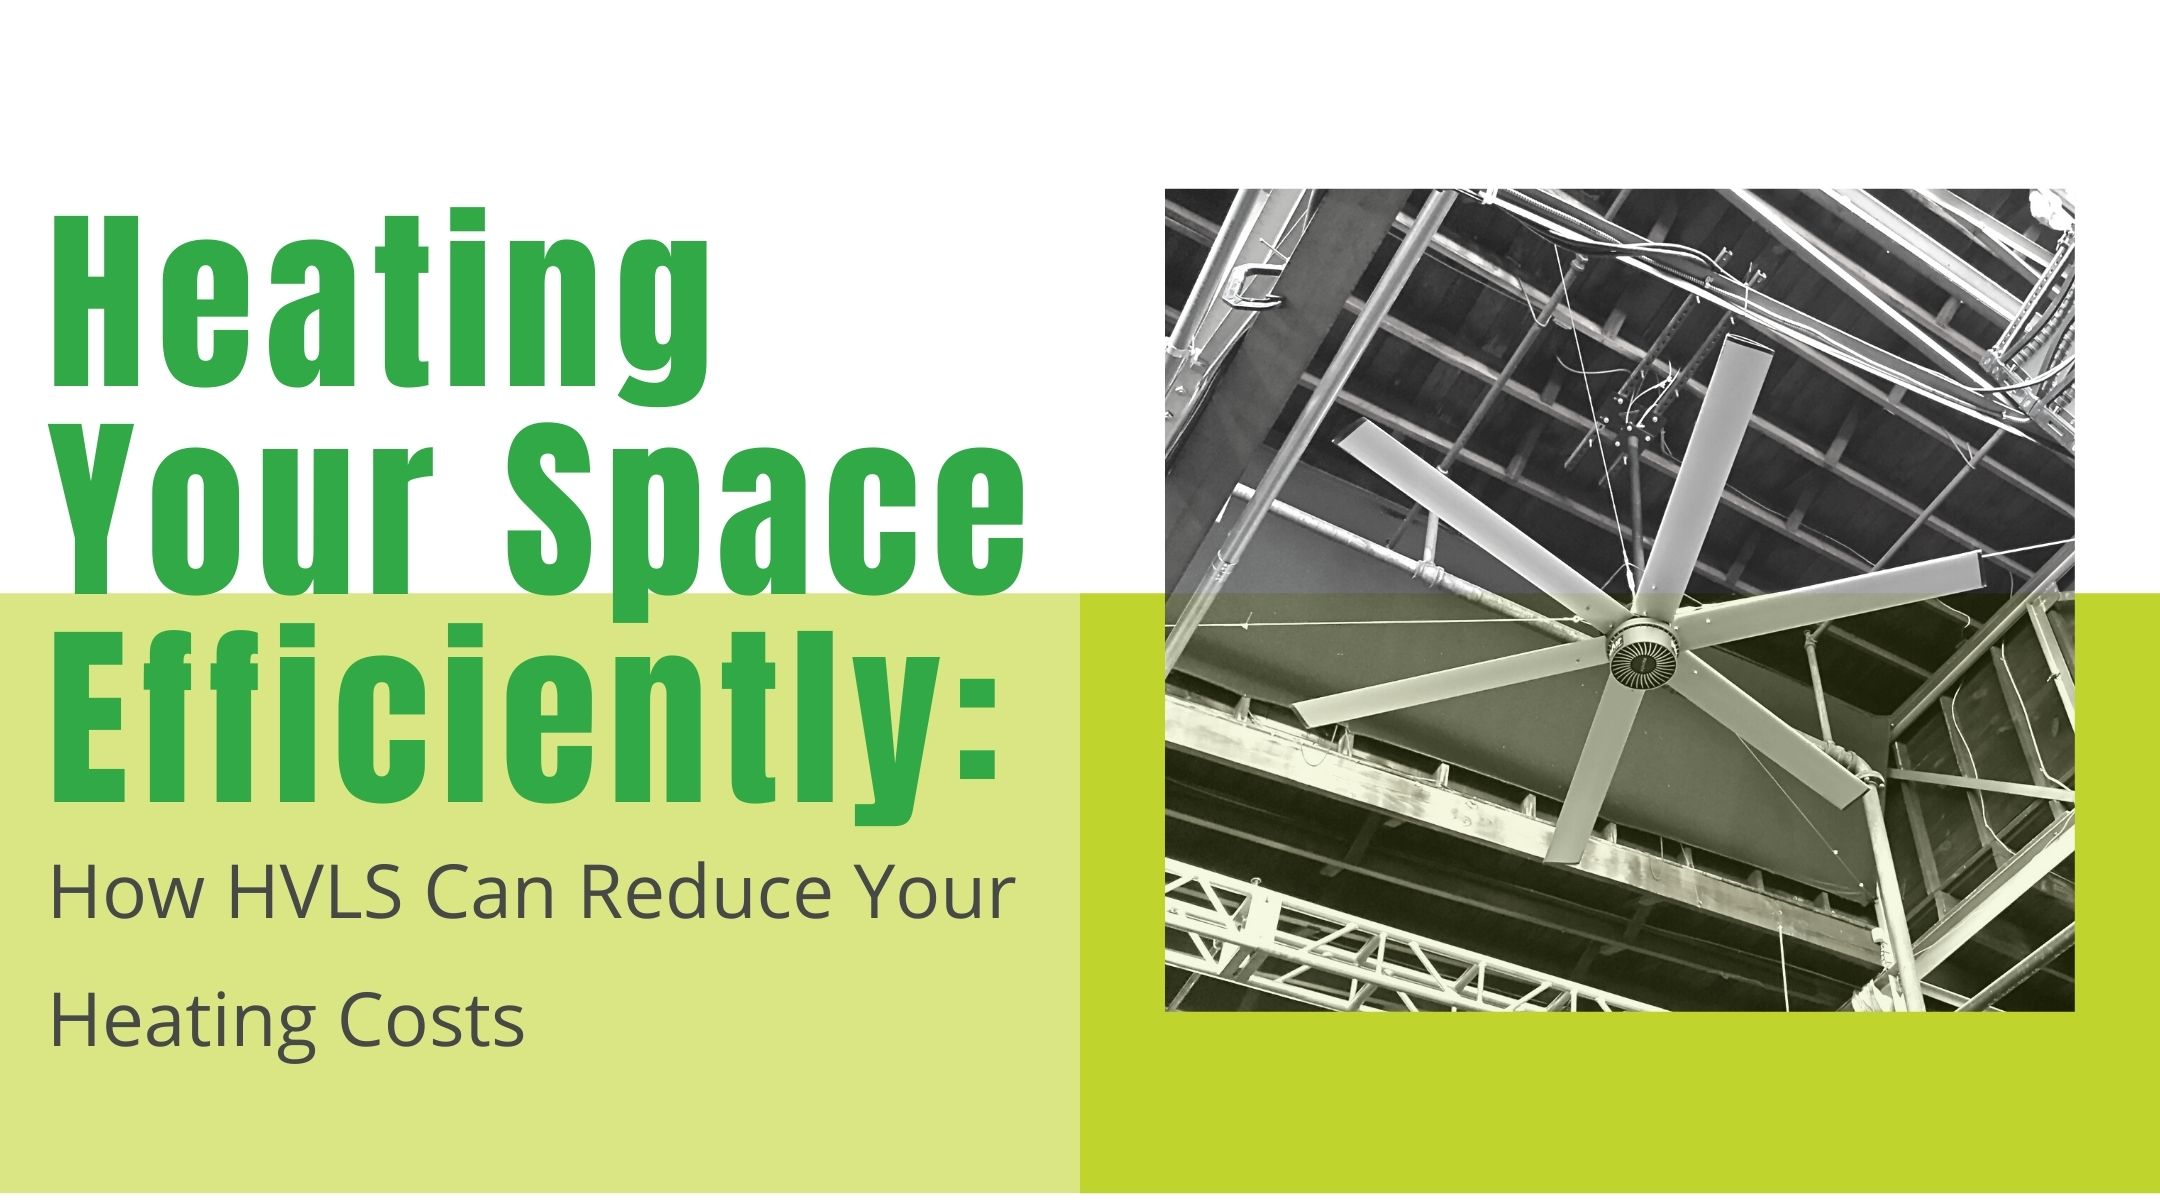 Heating Your Space Efficiently How HVLS Can Reduce Your Heating Costs